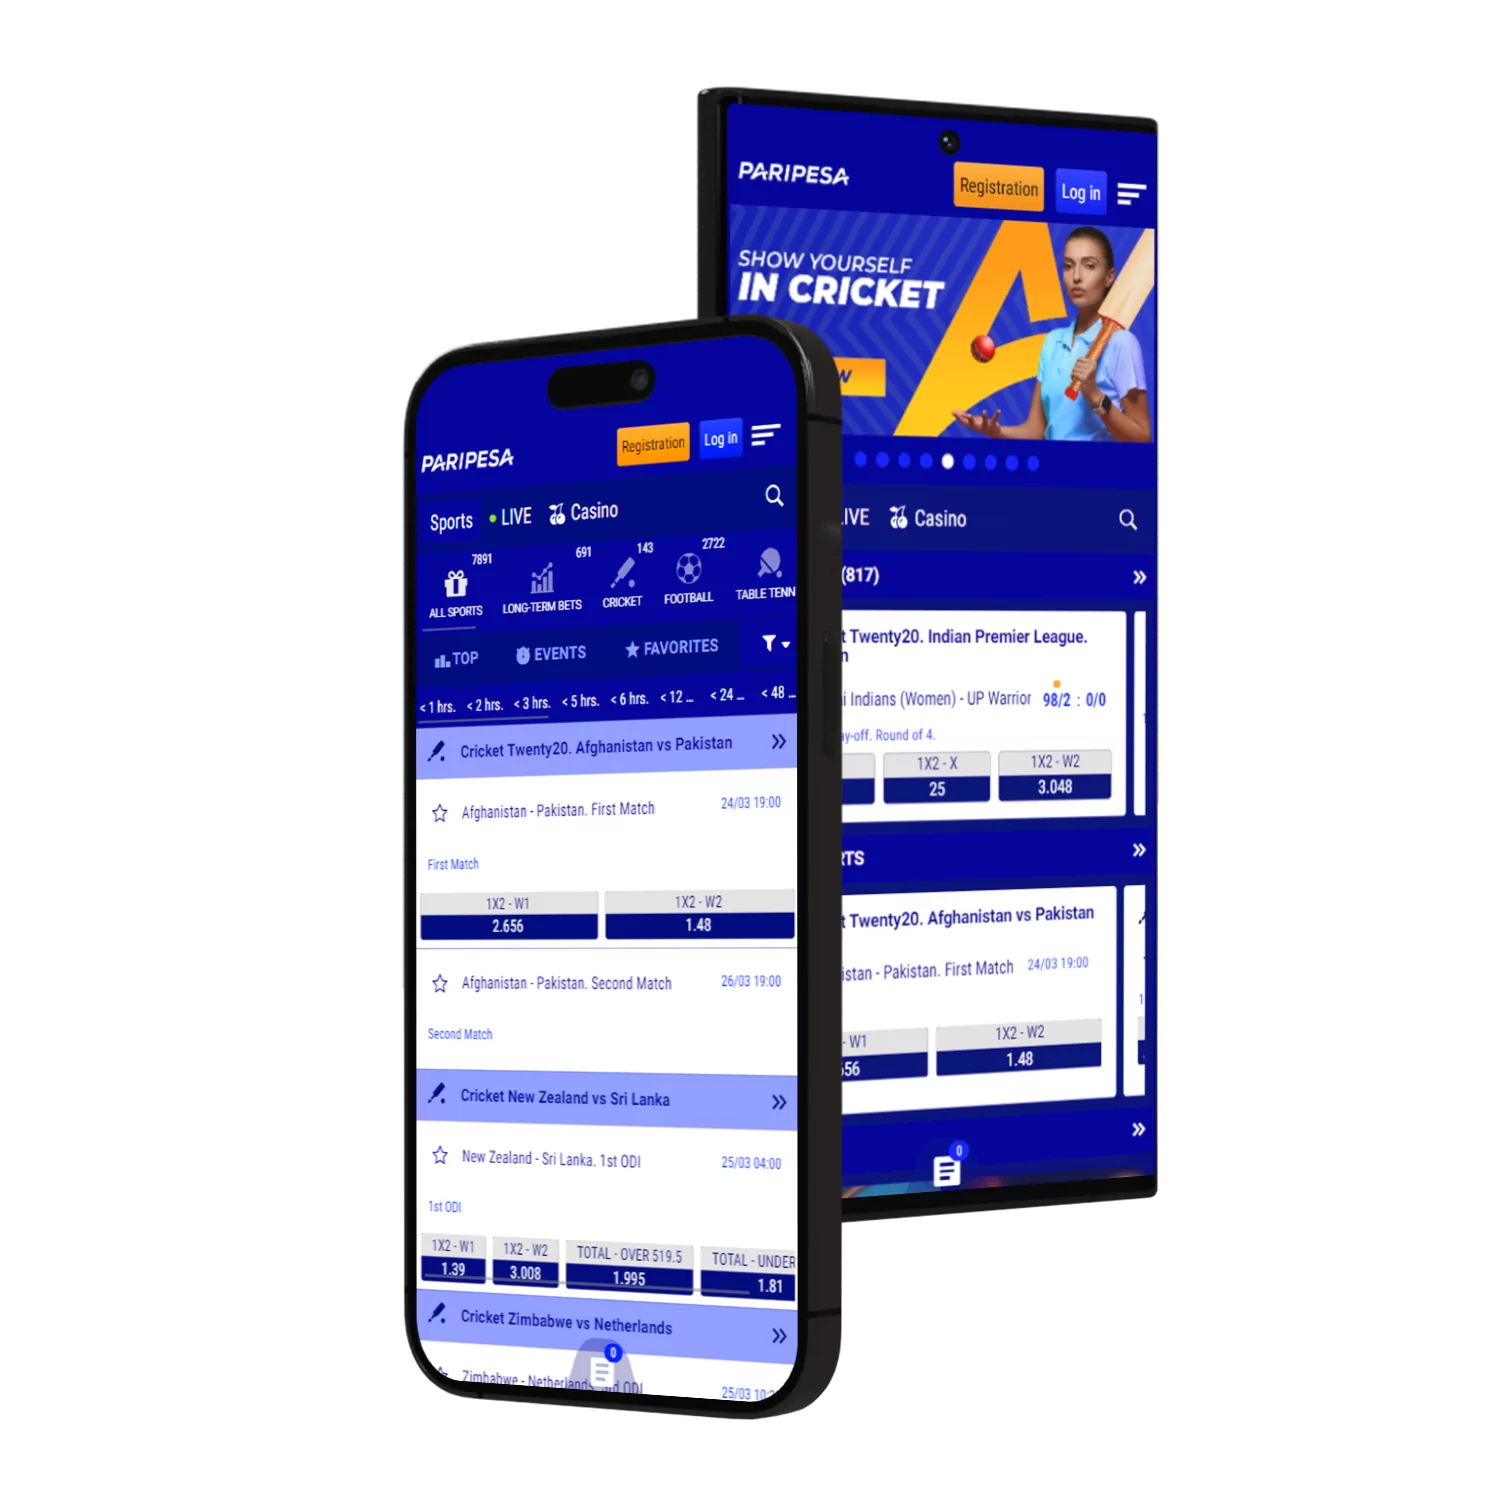 You can place bets and win real money in the Paripesa app.